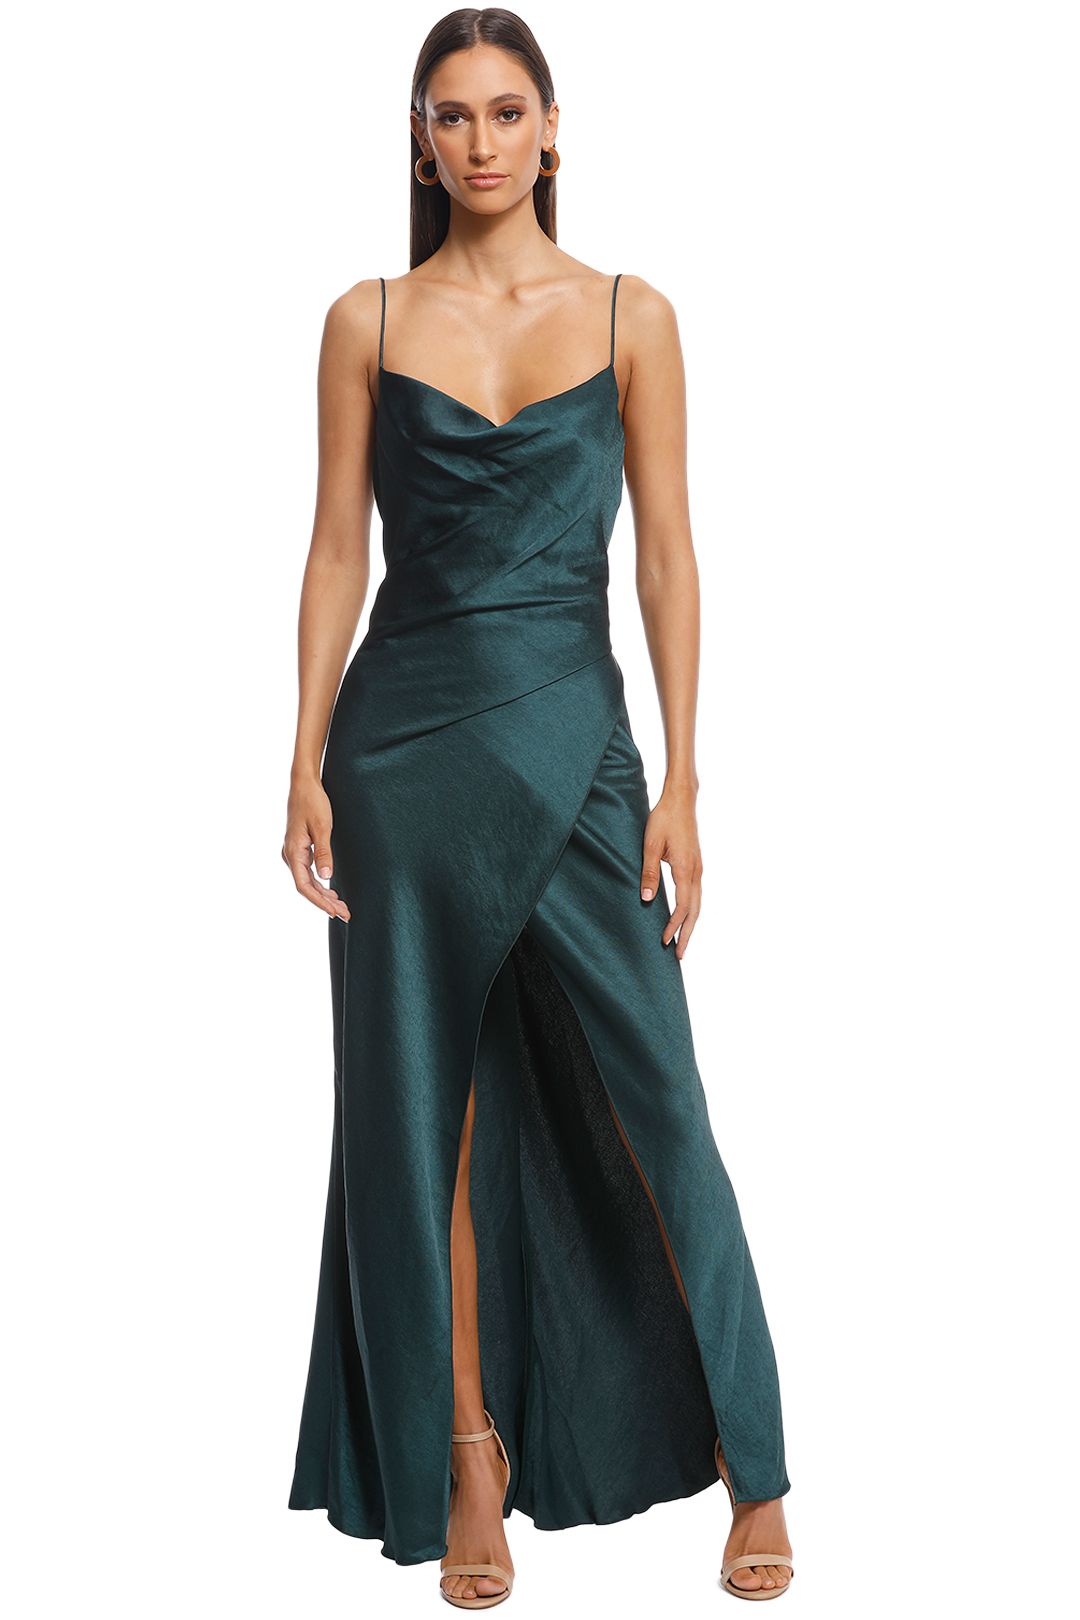 Camilla and Marc - Bowery Slip Dress - Fitzgerald Green - Front